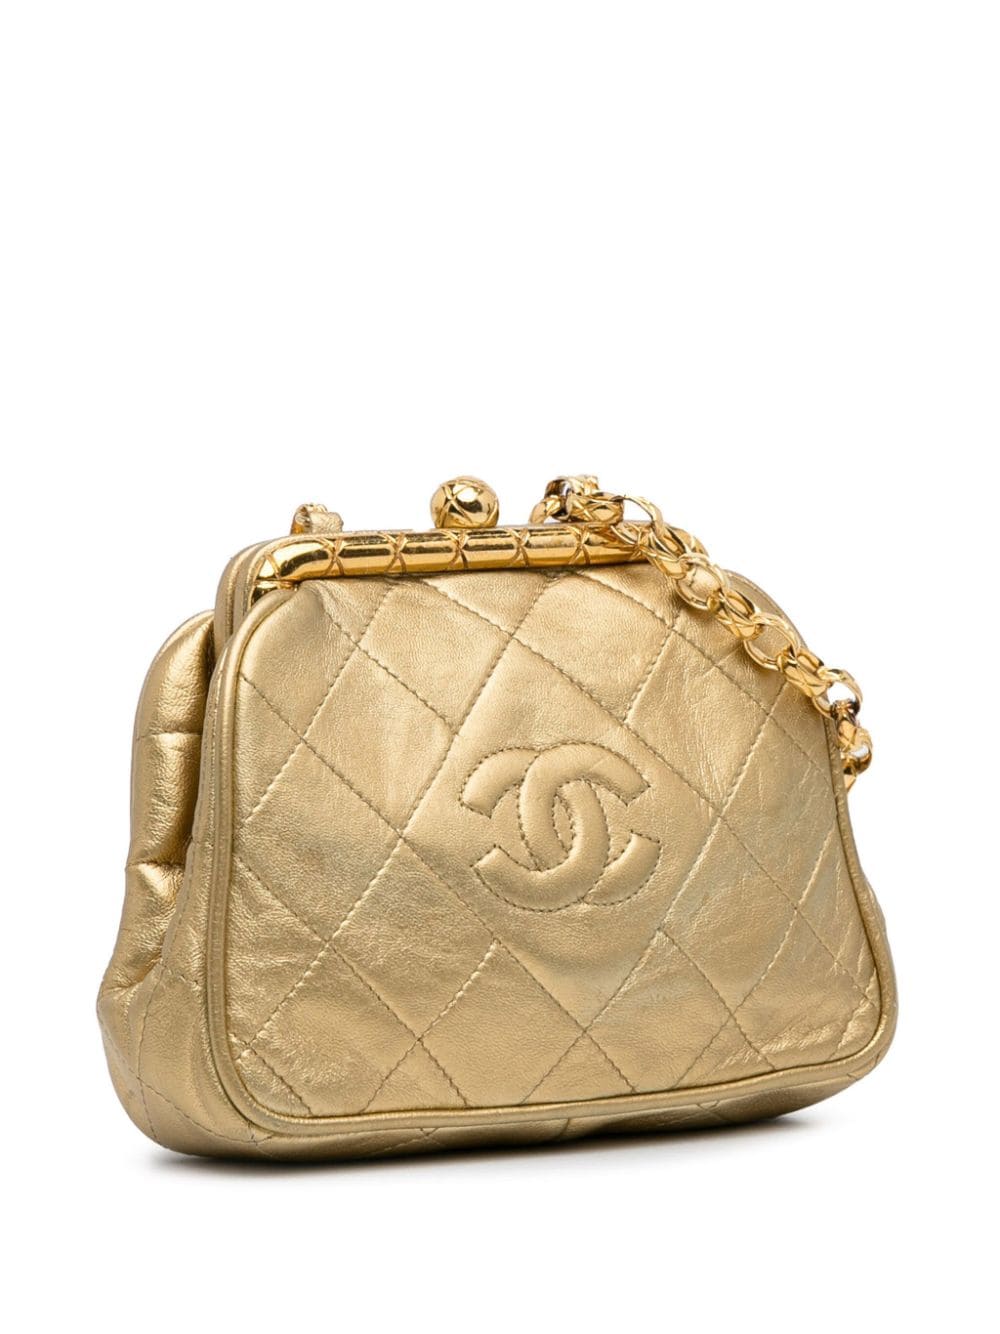 Pre-owned Chanel 1989-1991 Cc Lambskin Kiss Lock Frame Crossbody Bag In Gold